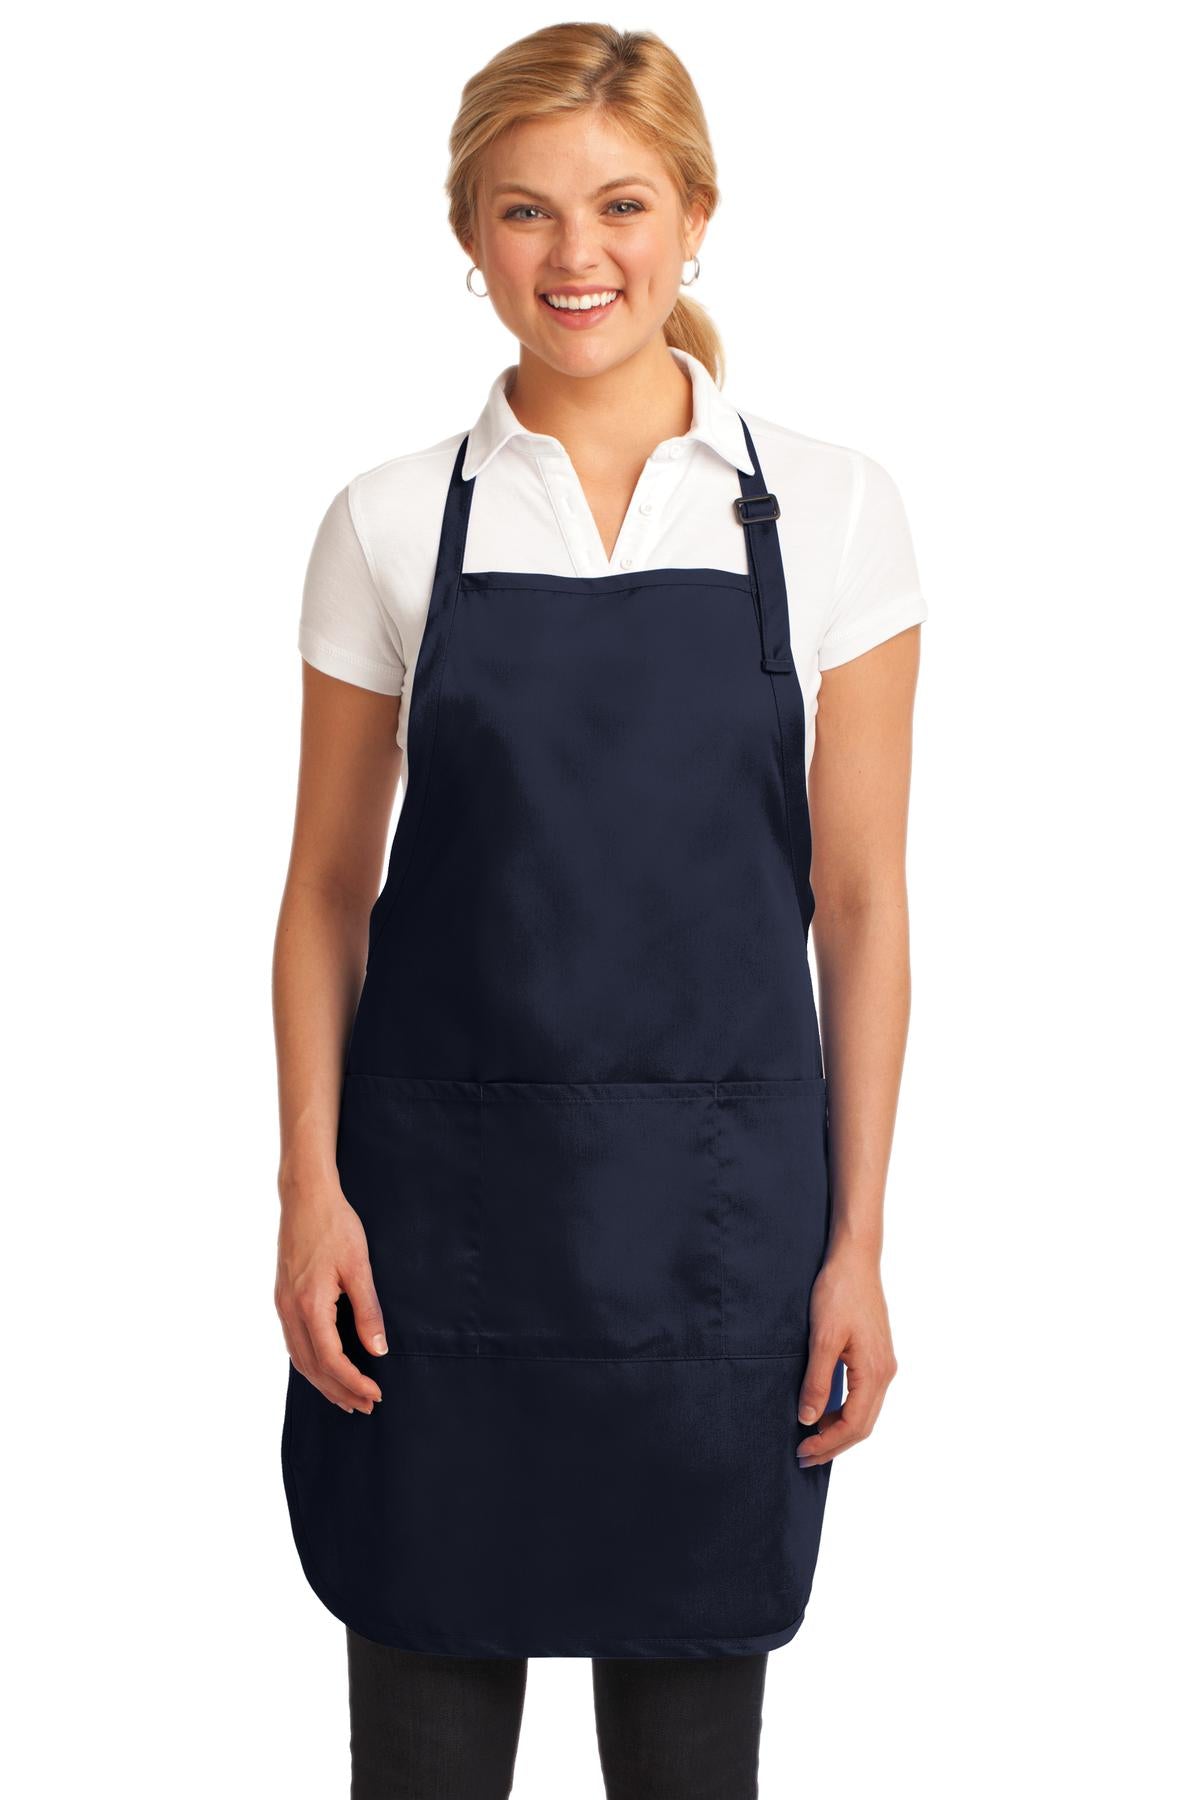 Port Authority® Easy Care Full-Length Apron with Stain Release. A703 - DFW Impression